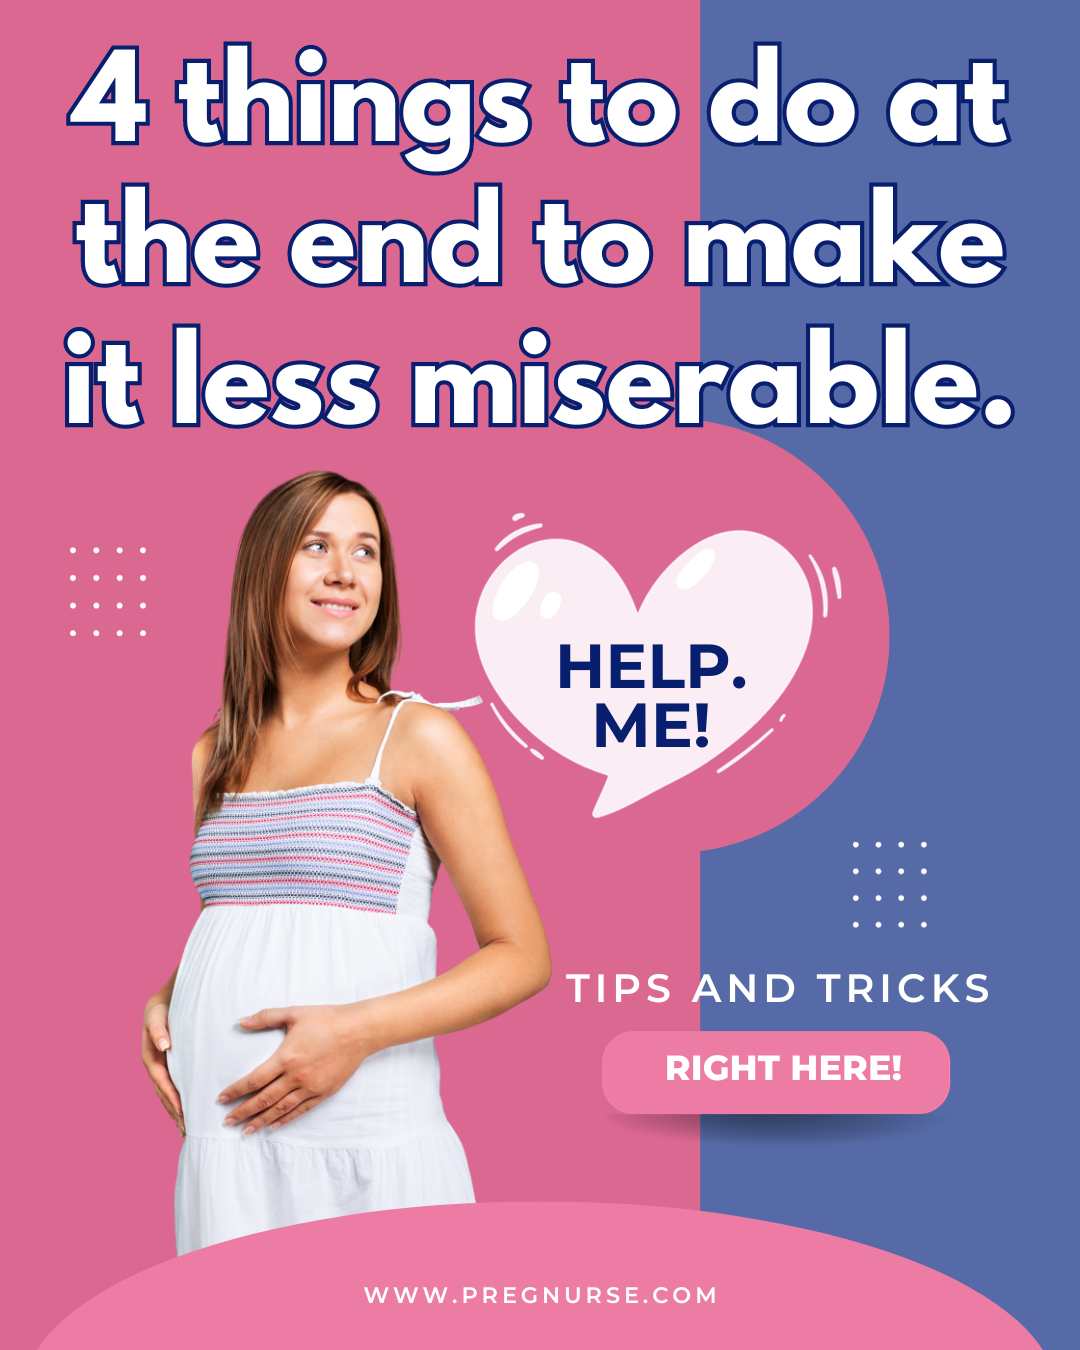 Looking for some practical remedies for your end-of-pregnancy discomforts? We’ve got you covered! Here are some tried-and-tested tips from The Pregnancy Nurse®. From asking the right questions to your healthcare provider to creating healthy habits, discover ways to feel better and prepare for your childbirth journey.